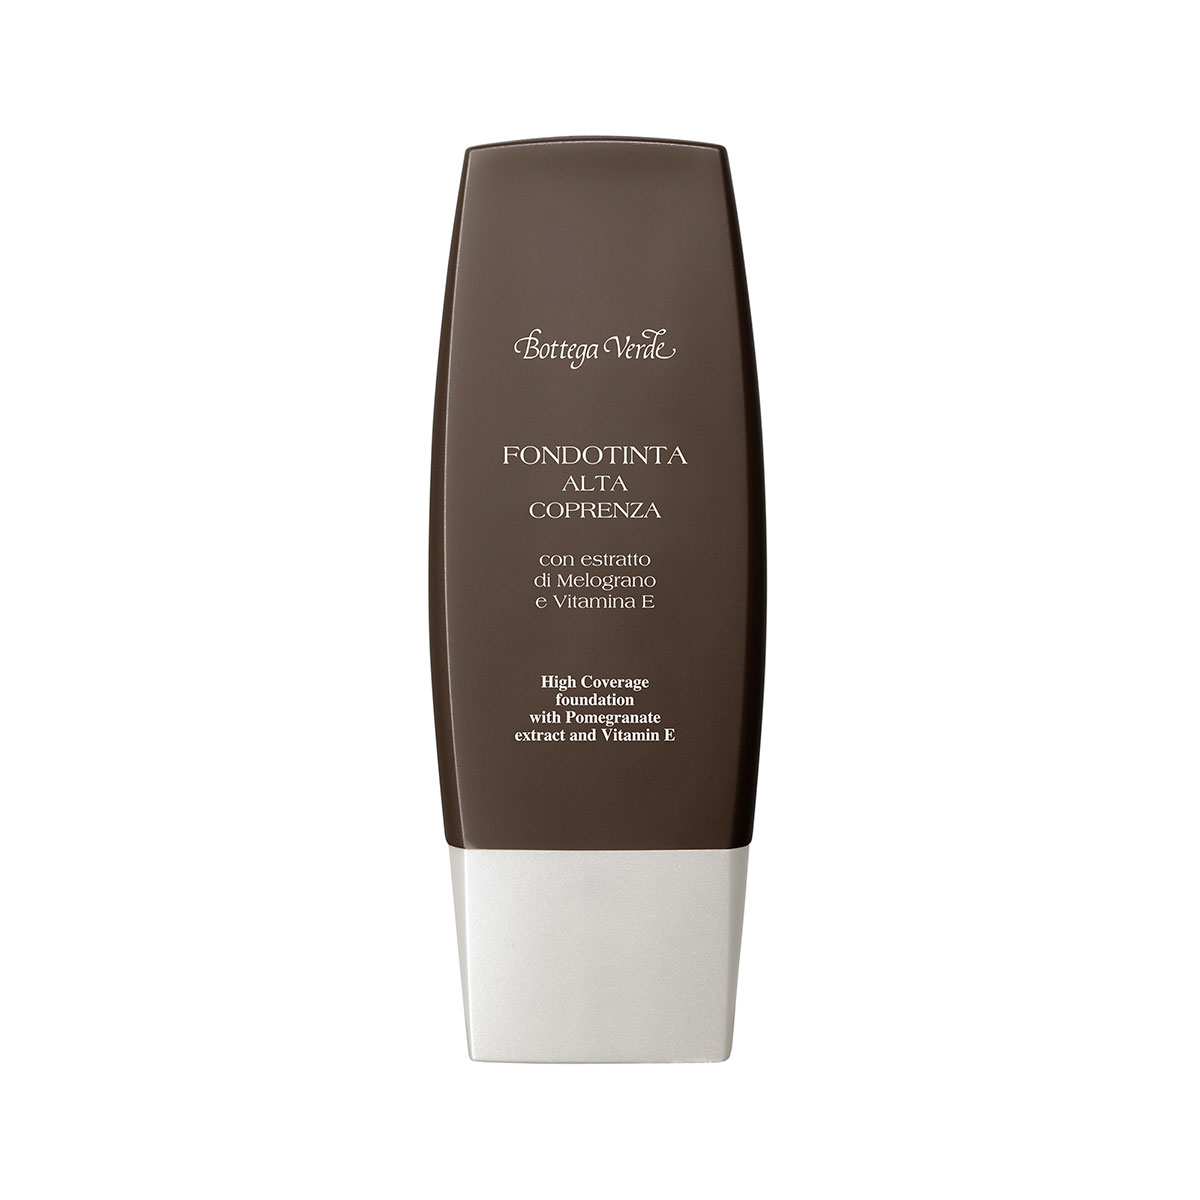 High Coverage Foundation - Immediate Corrective Action - with Pomegranate Extract and Vitamin E (30 ml)